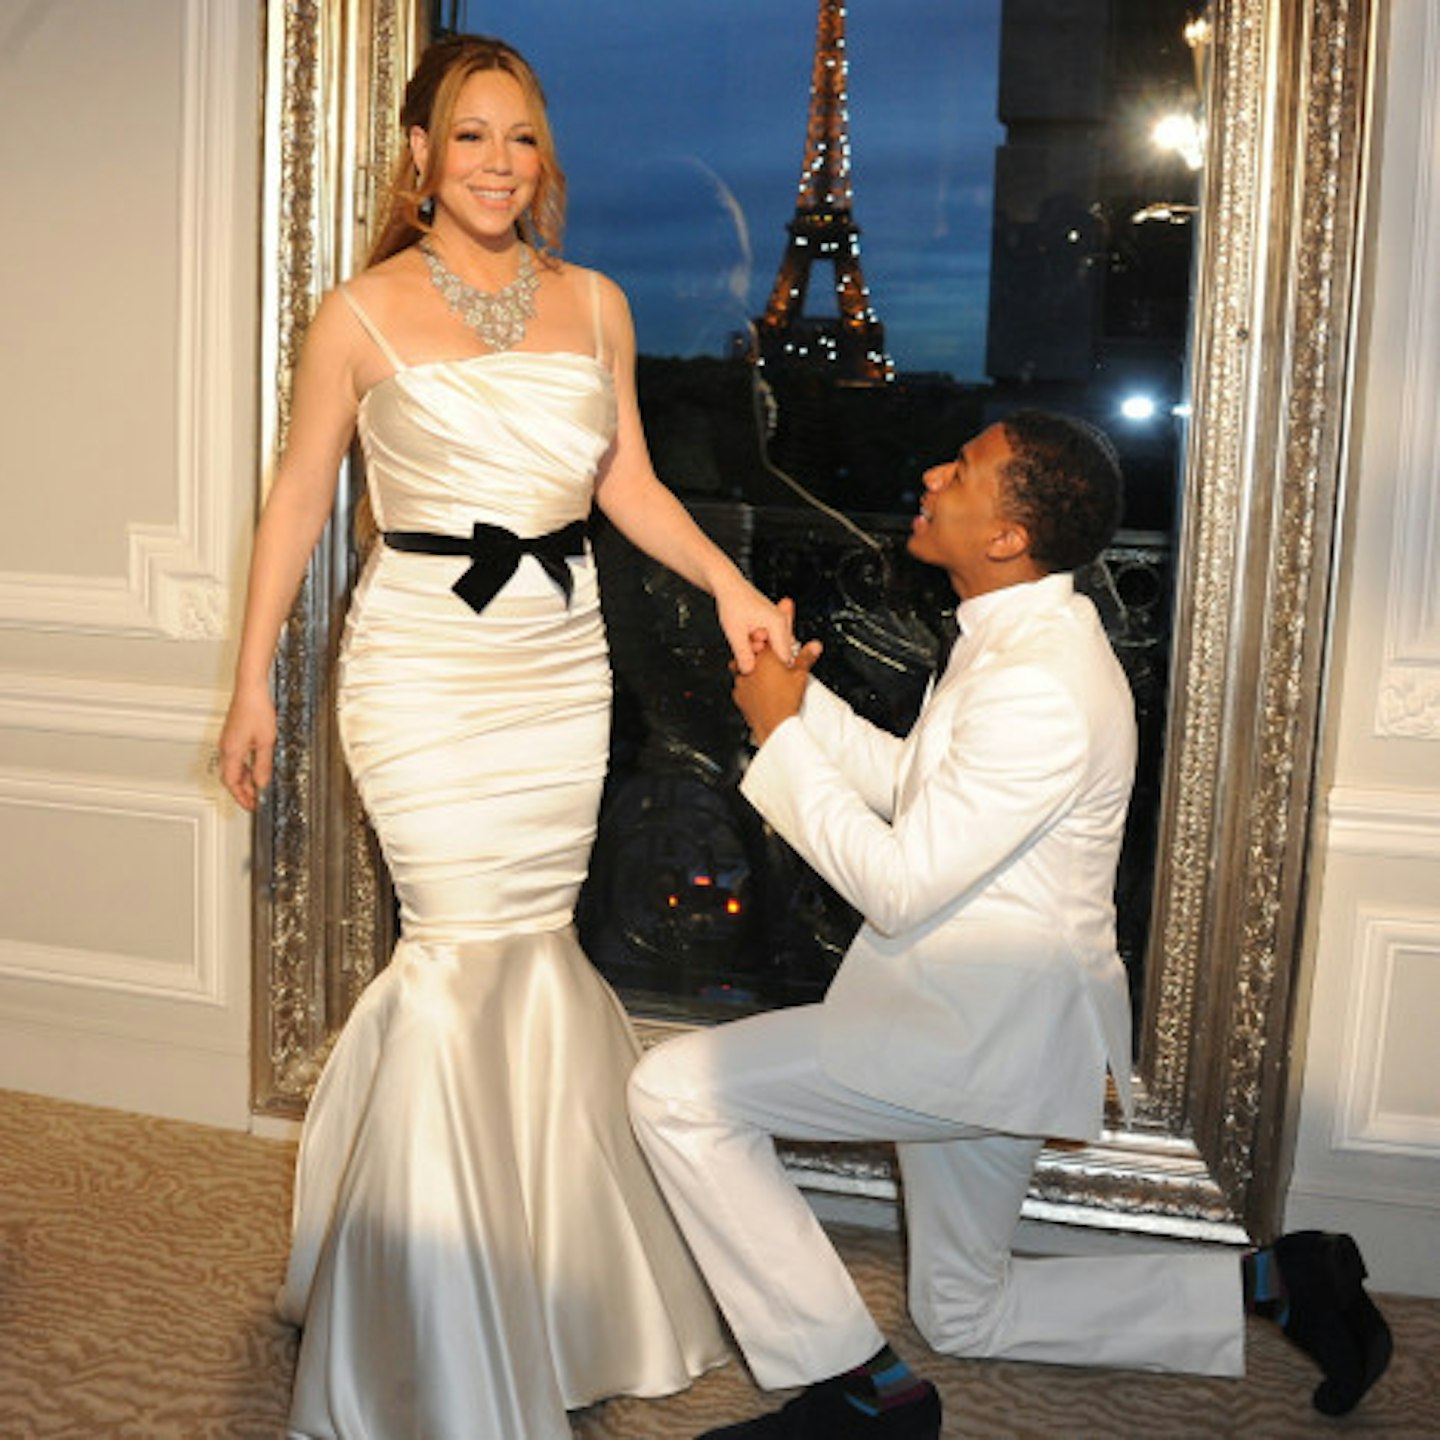 Nick Cannon and Mariah Carey in happier times